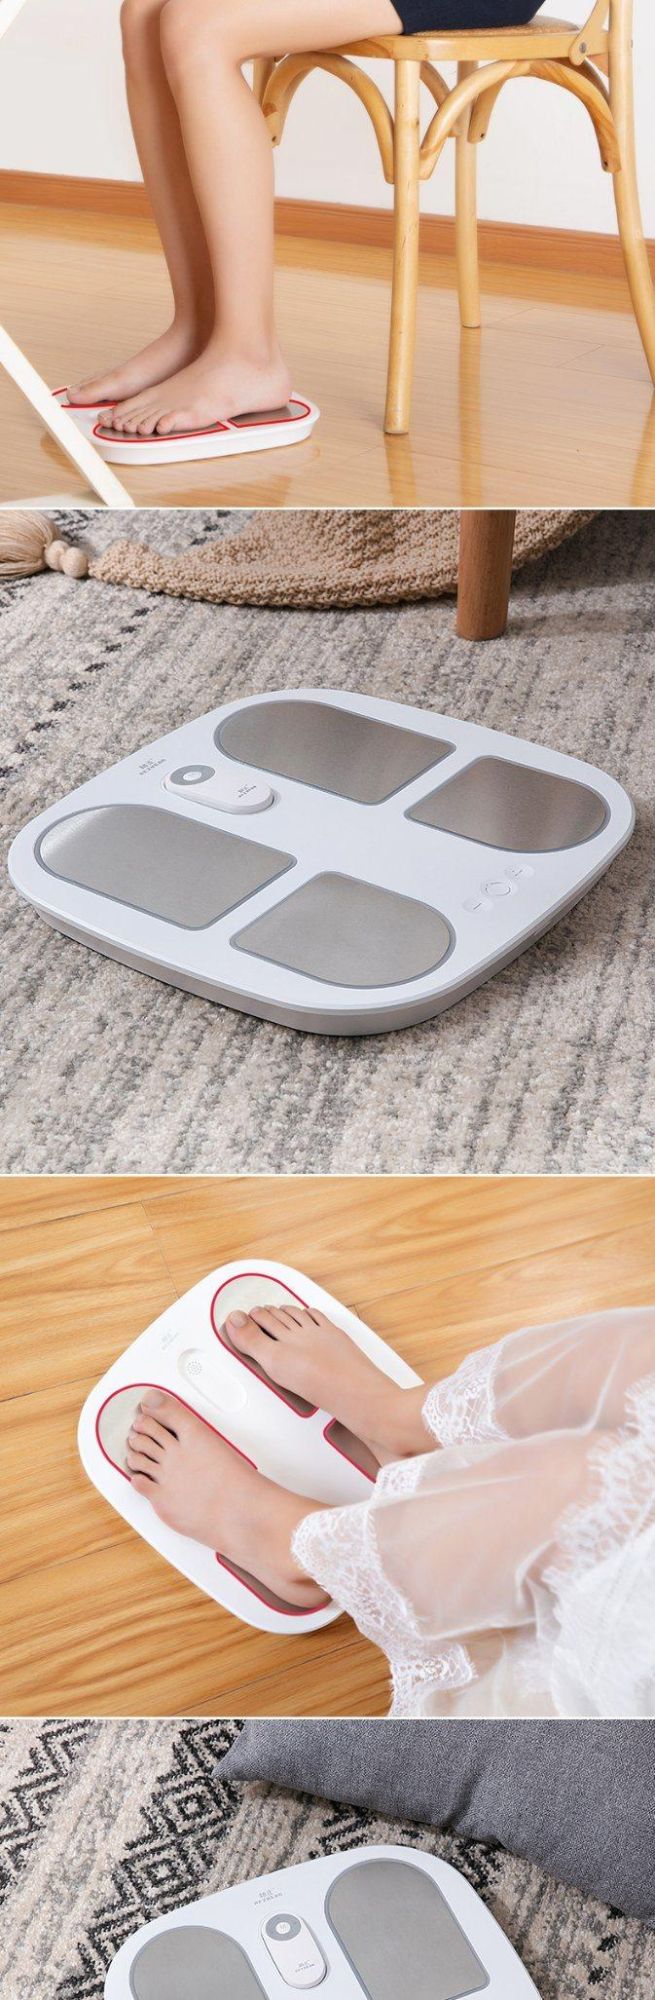 Hezheng Newest Multifunction Electric Pulse Infrared Foot Massager